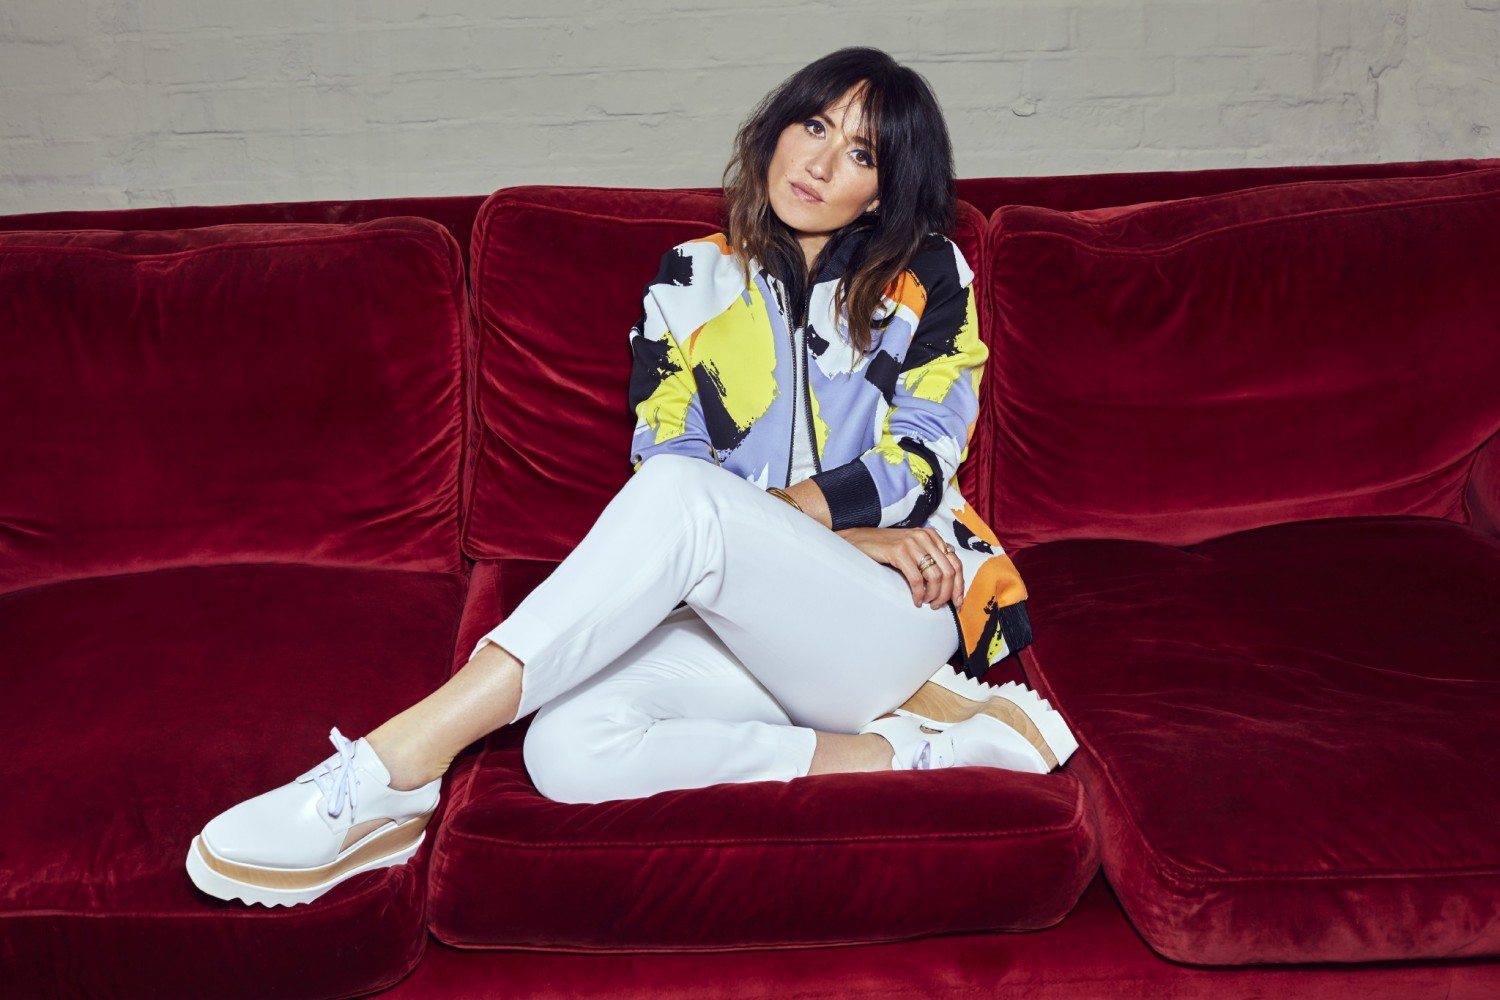 KT Tunstall talks to Downtown, to headline Irving Plaza on Sept. 19